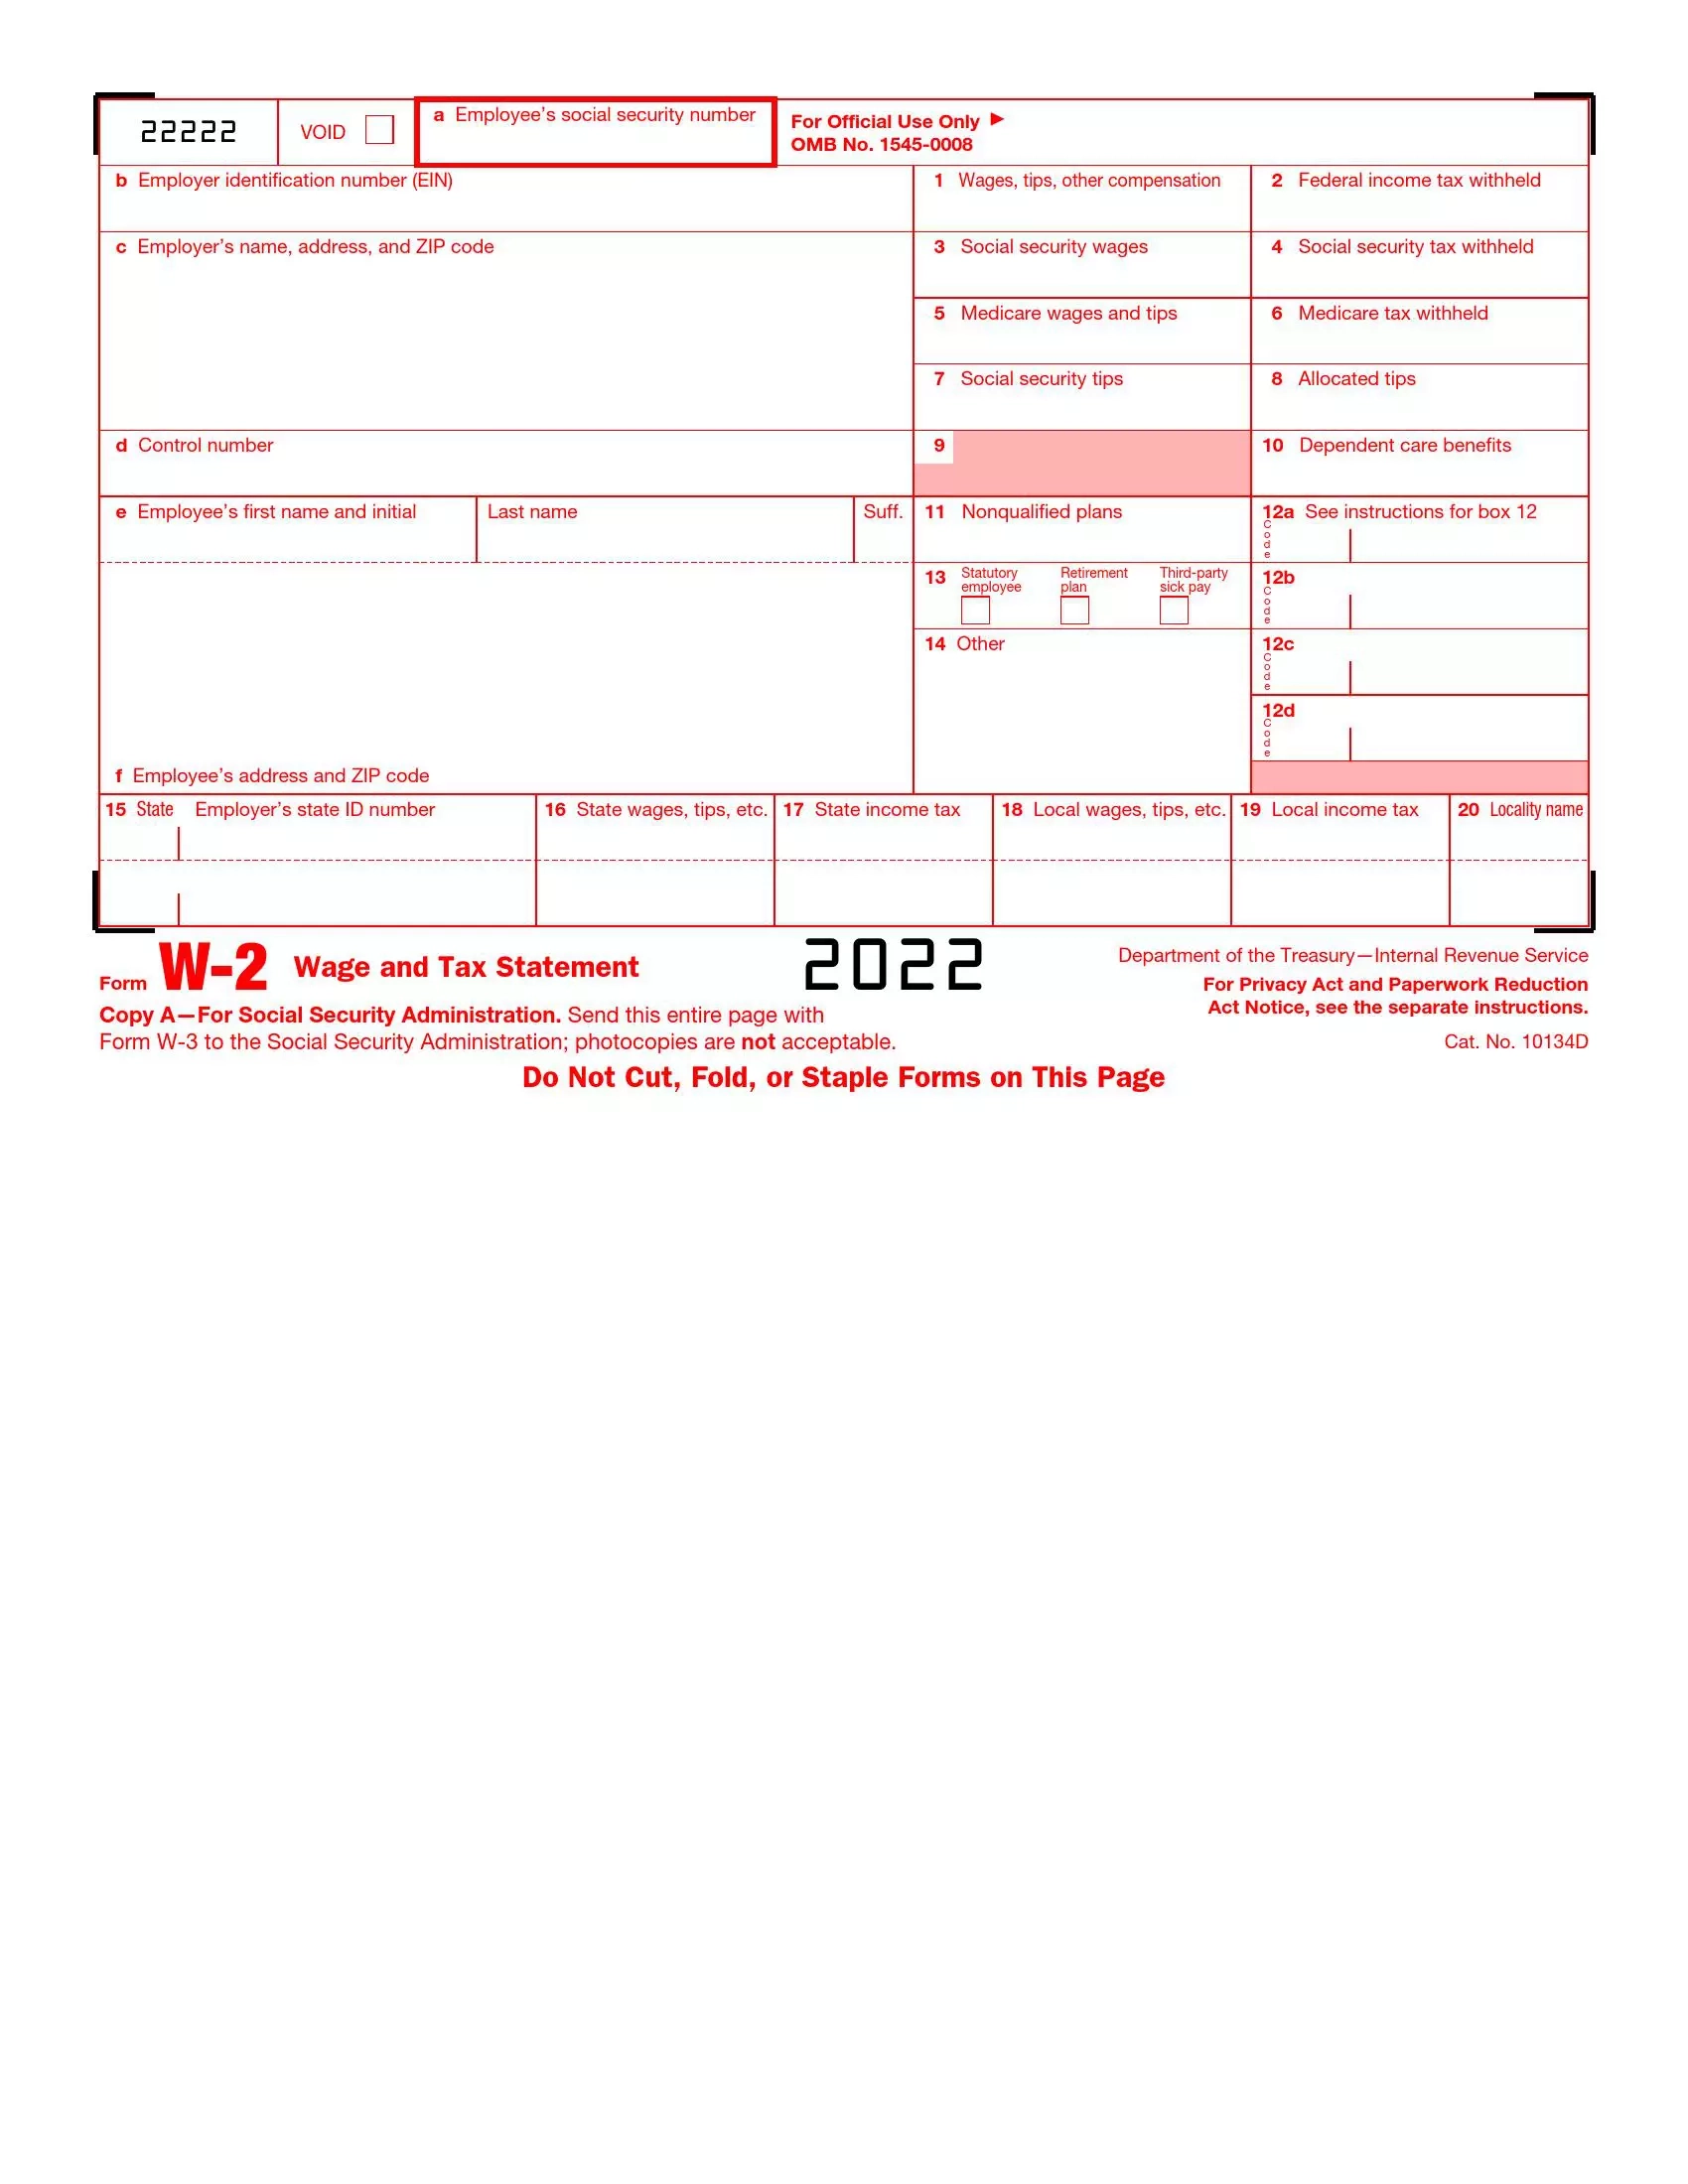 Irs Form W-2 ≡ Fill Out Printable Pdf Forms Online inside Print W2 Form 2022